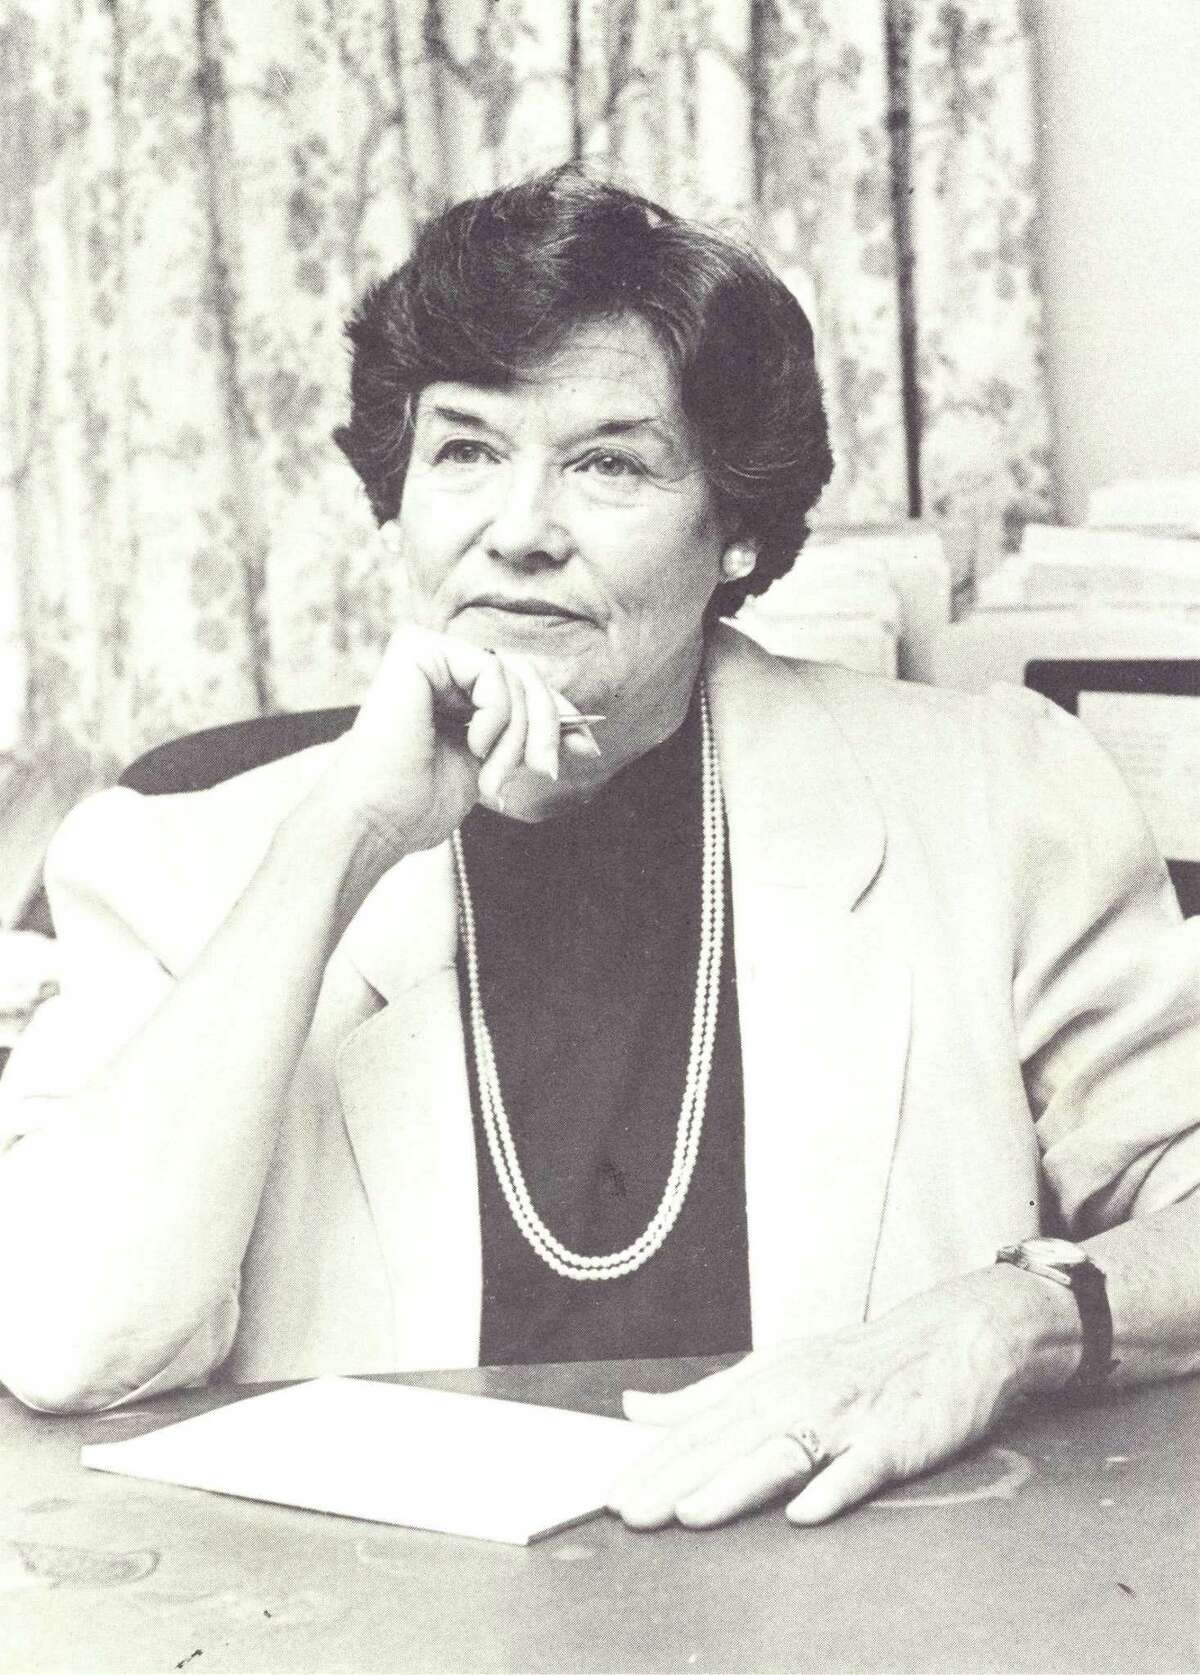 Jacky Durrell (1927-2009) became Fairfield's first woman First Selectman in 1983.